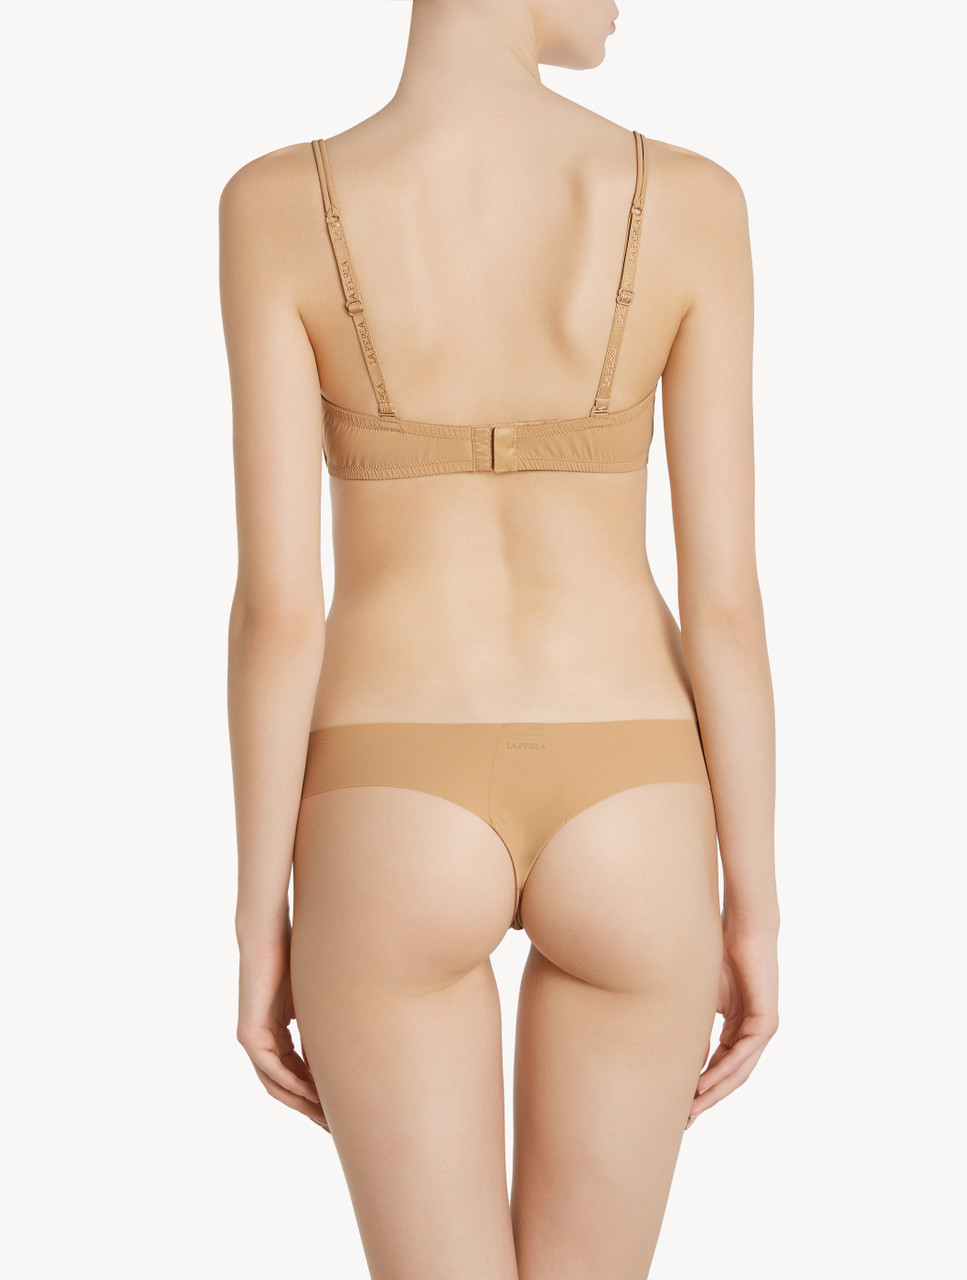 Laser-cut thong in nude